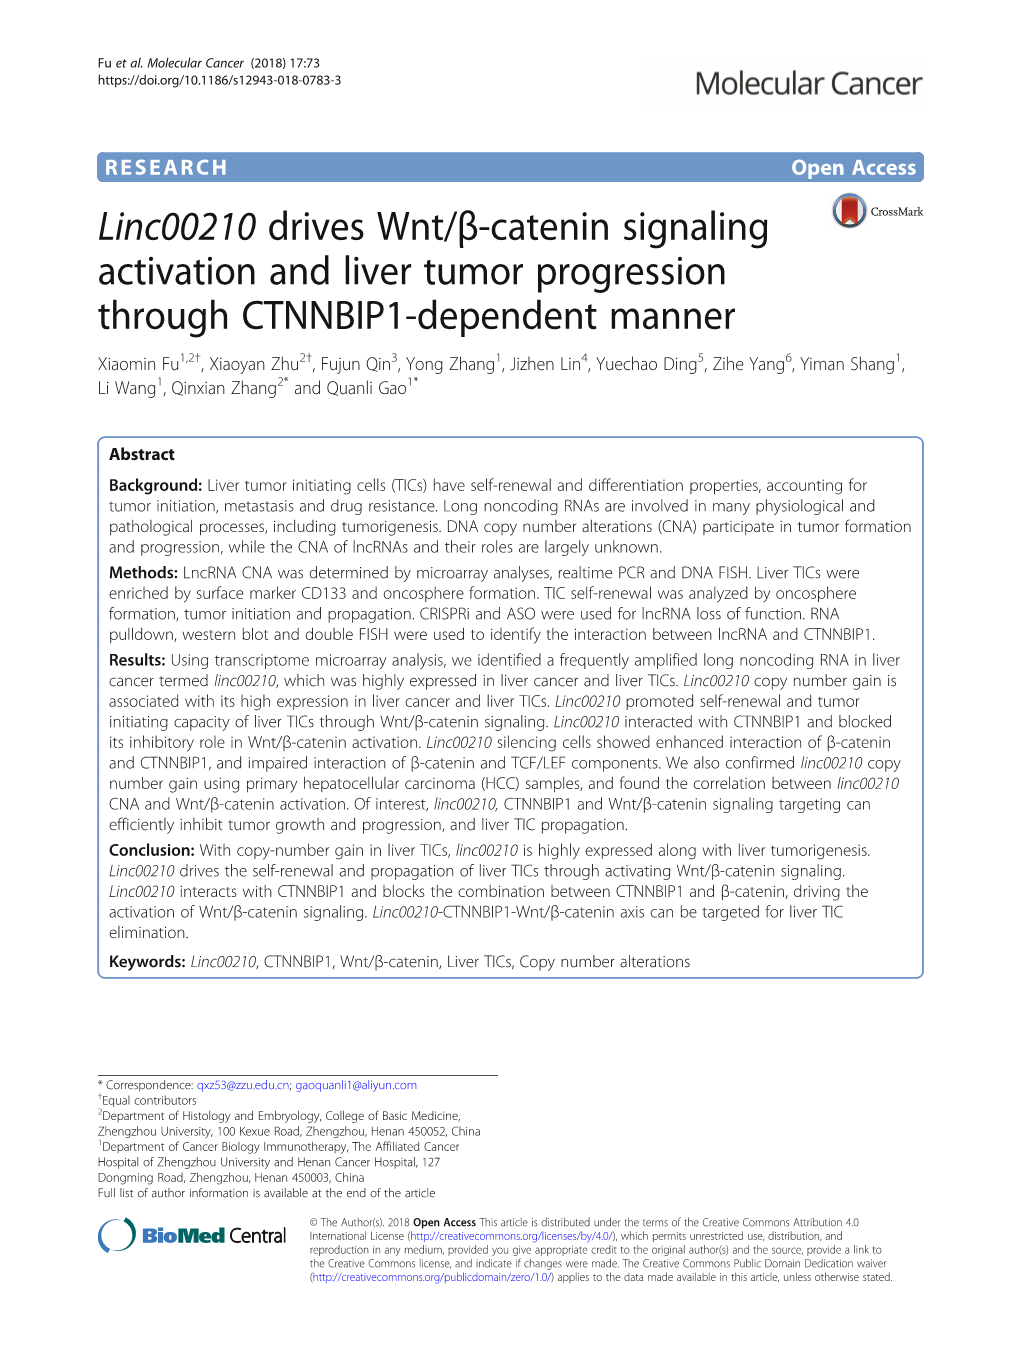 Linc00210 Drives Wnt/Β-Catenin Signaling Activation and Liver Tumor